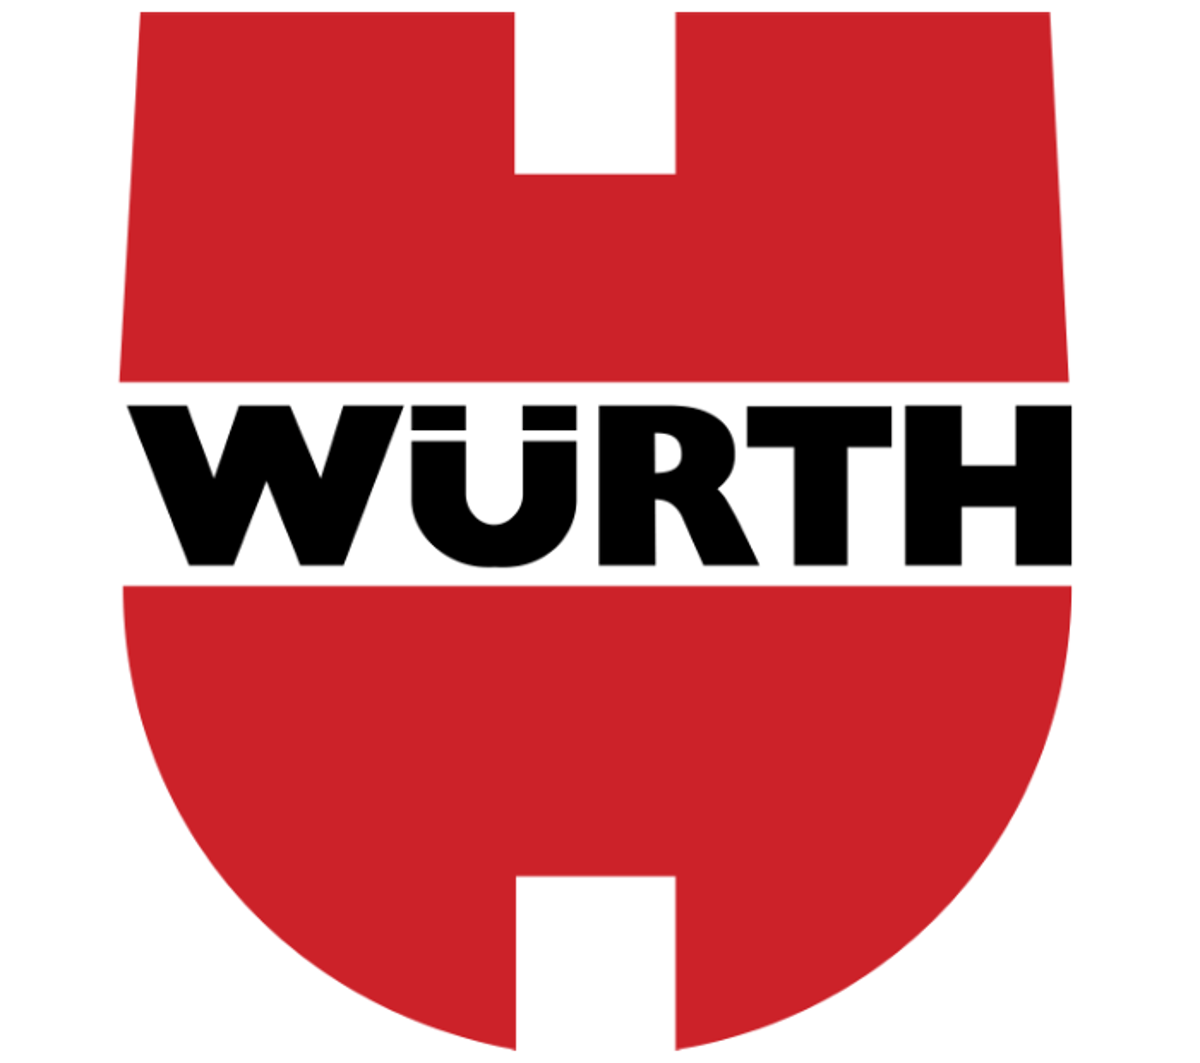 The Würth logo from the 1970s